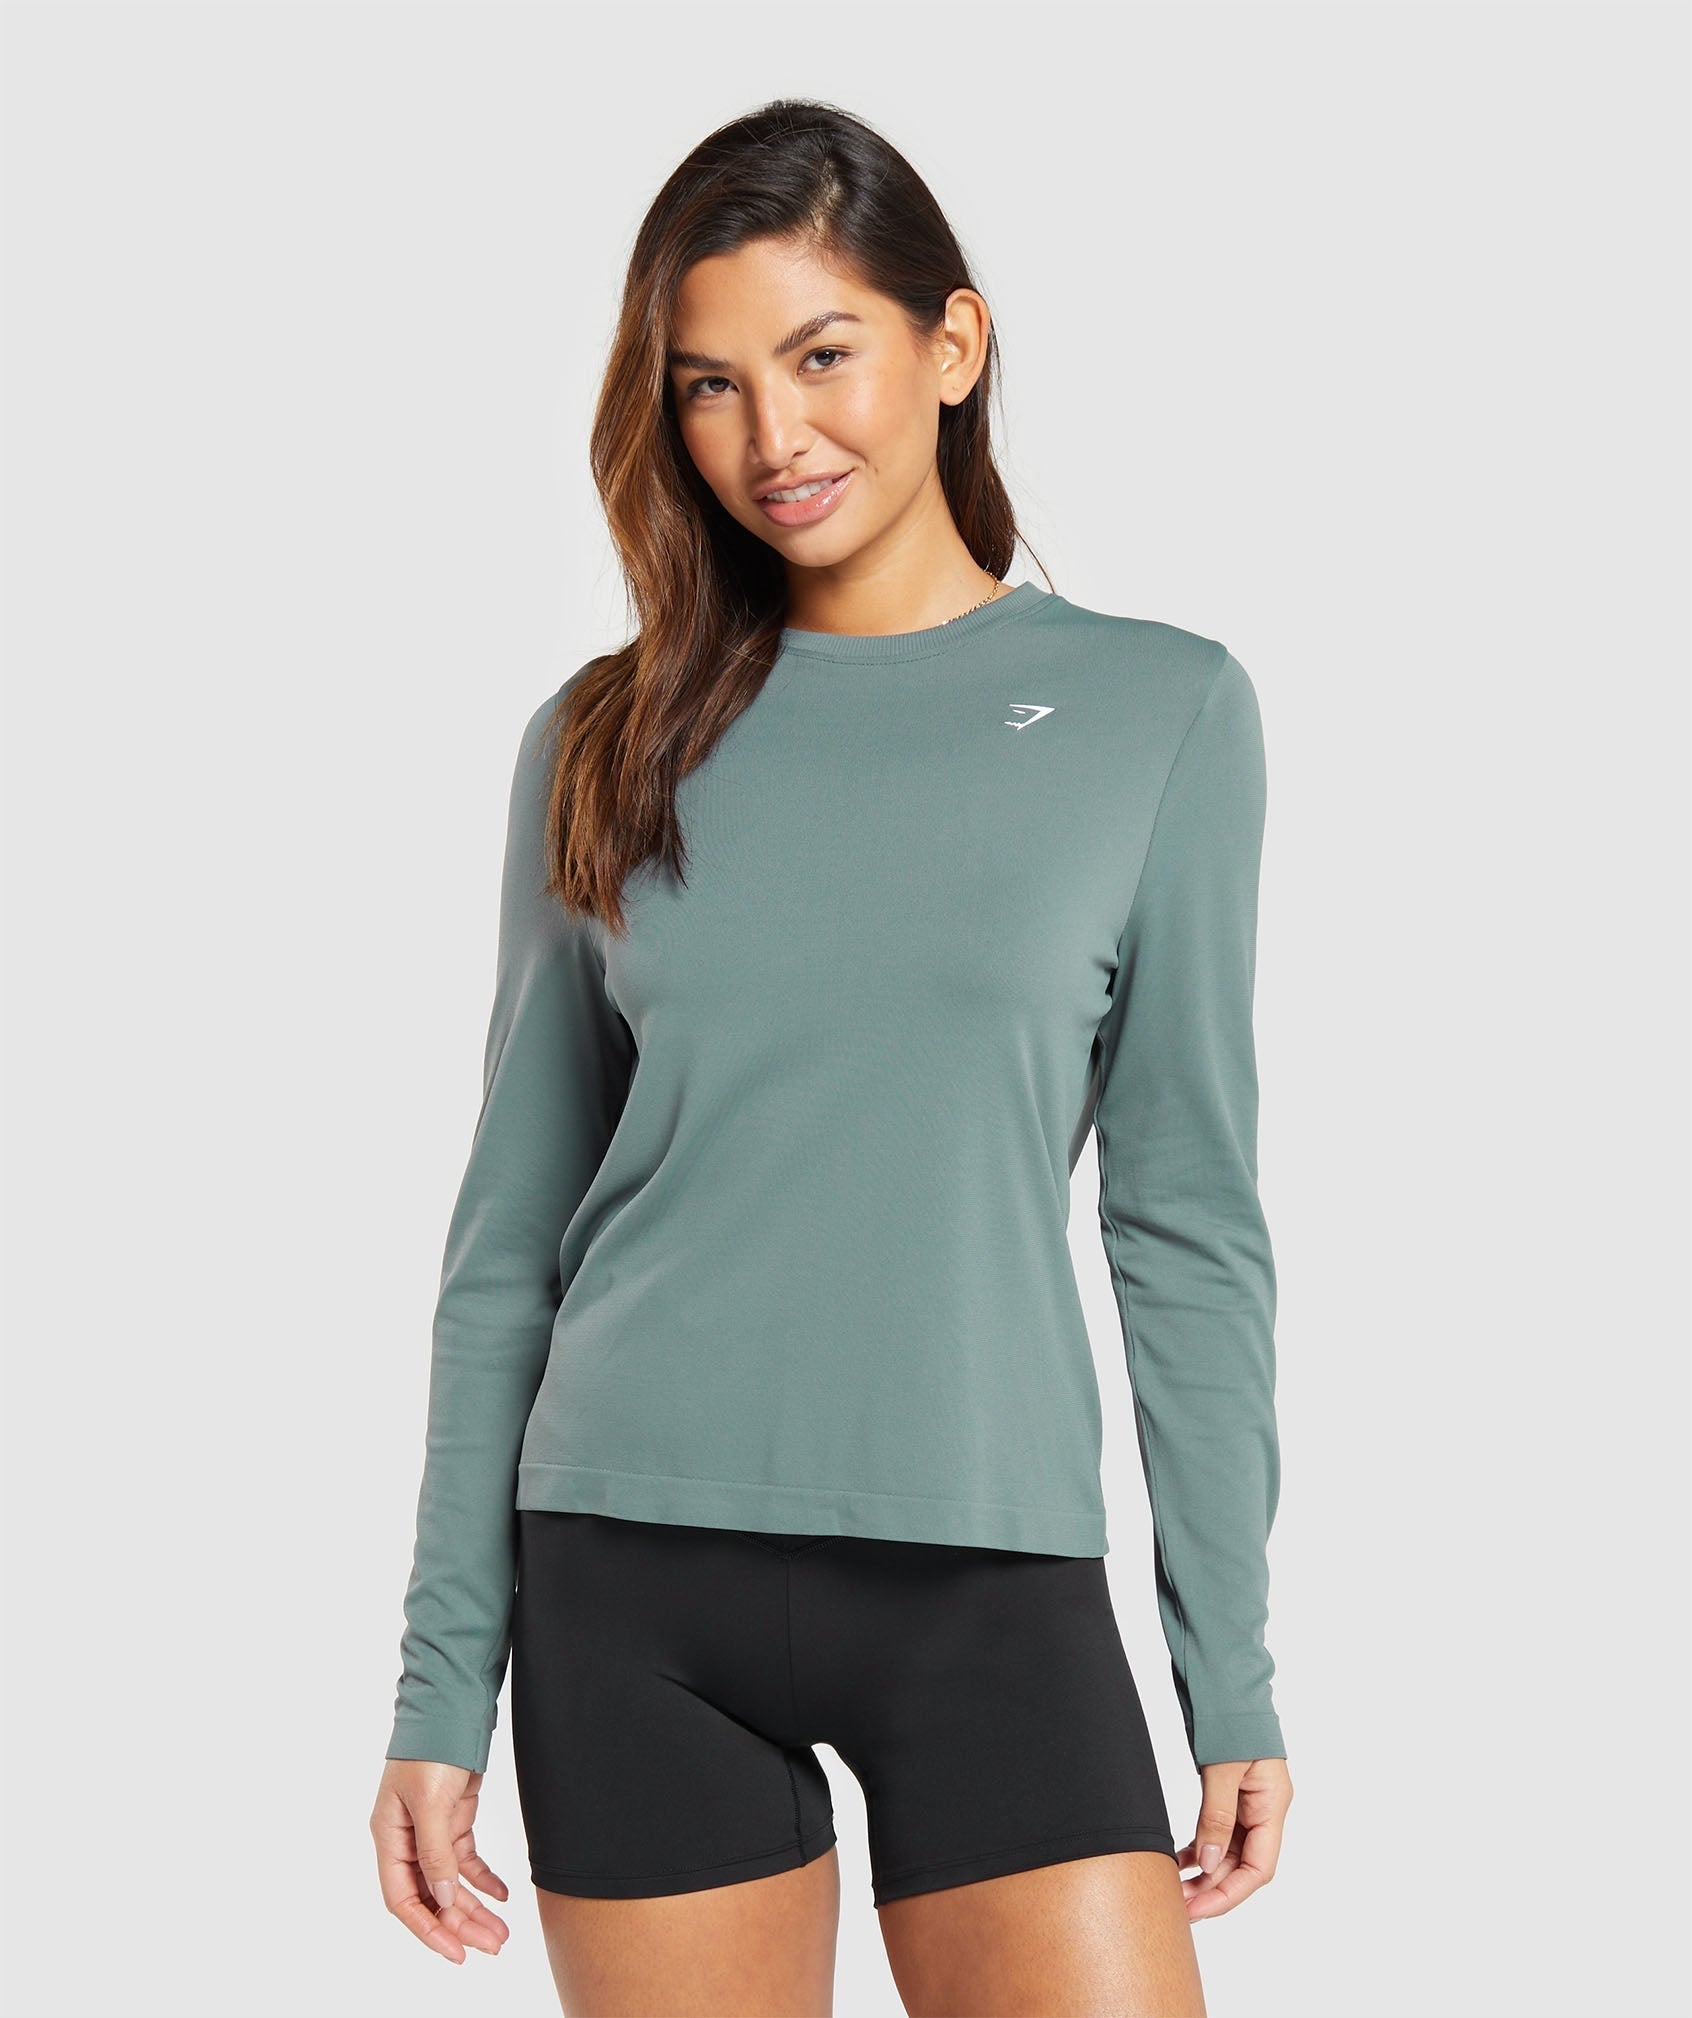 Everyday Seamless Long Sleeve Top in Cargo Teal